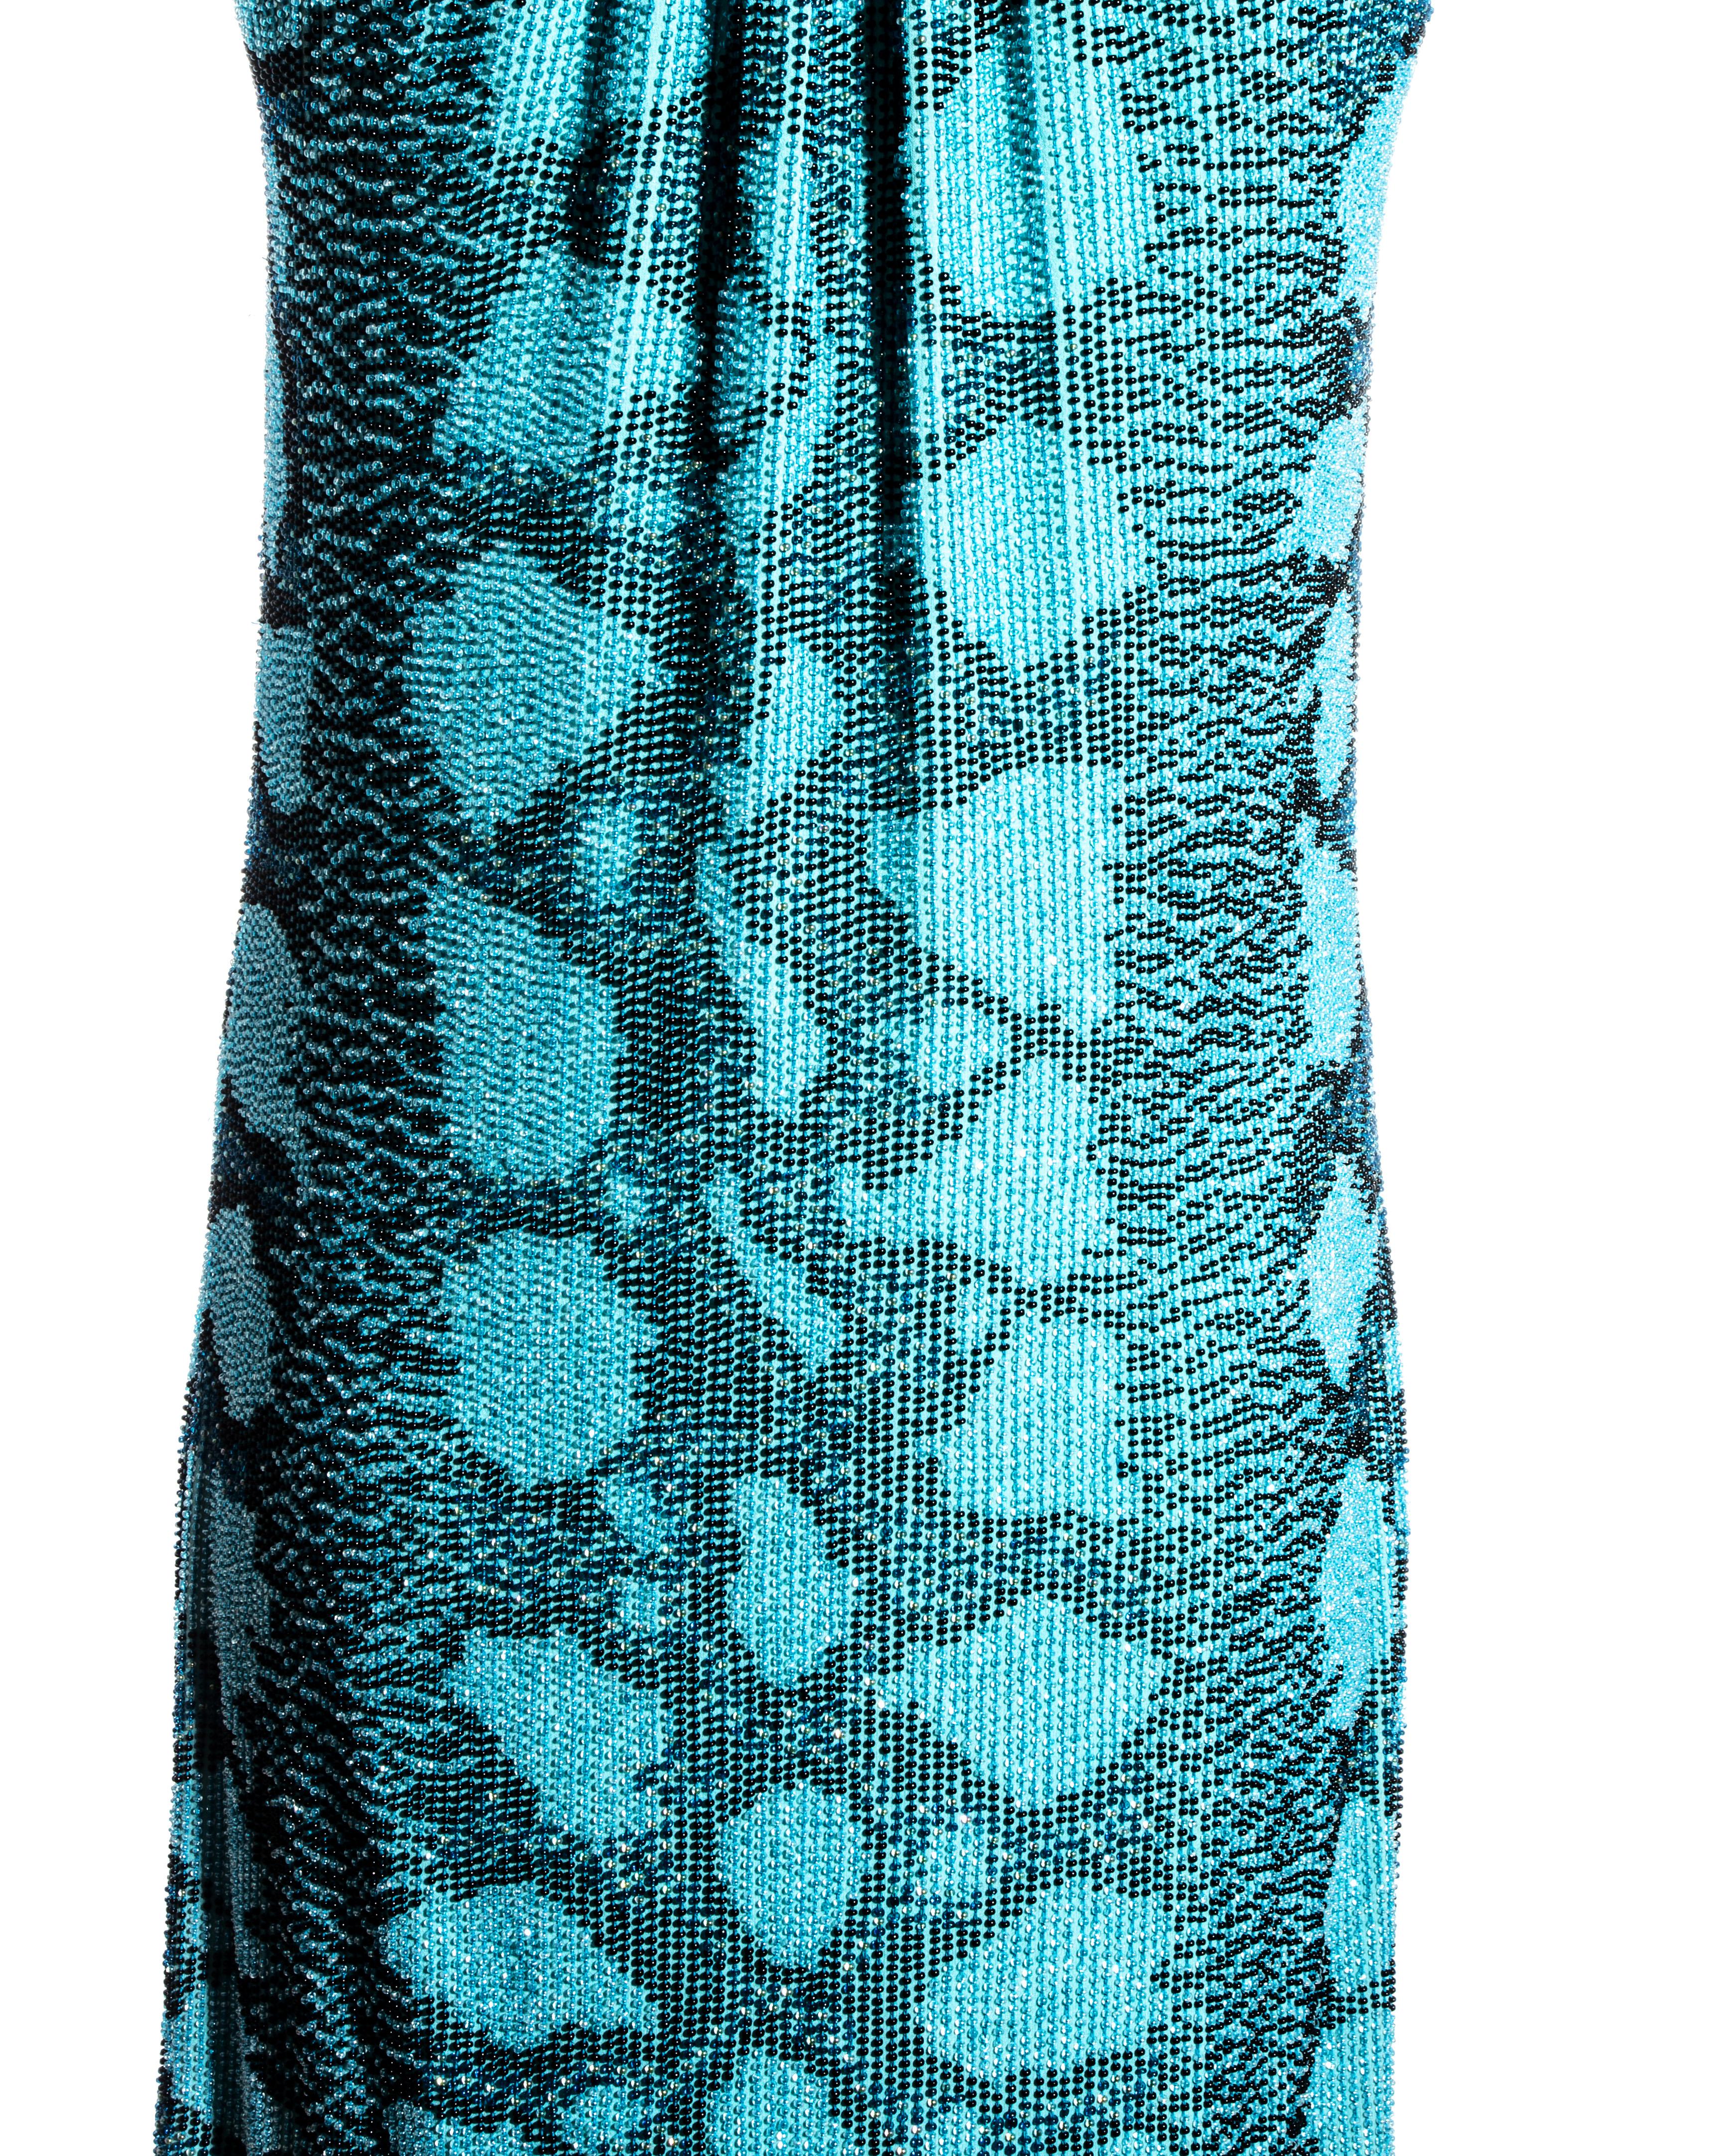 Women's Gucci by Tom Ford aqua blue beaded evening dress, ss 2000 For Sale